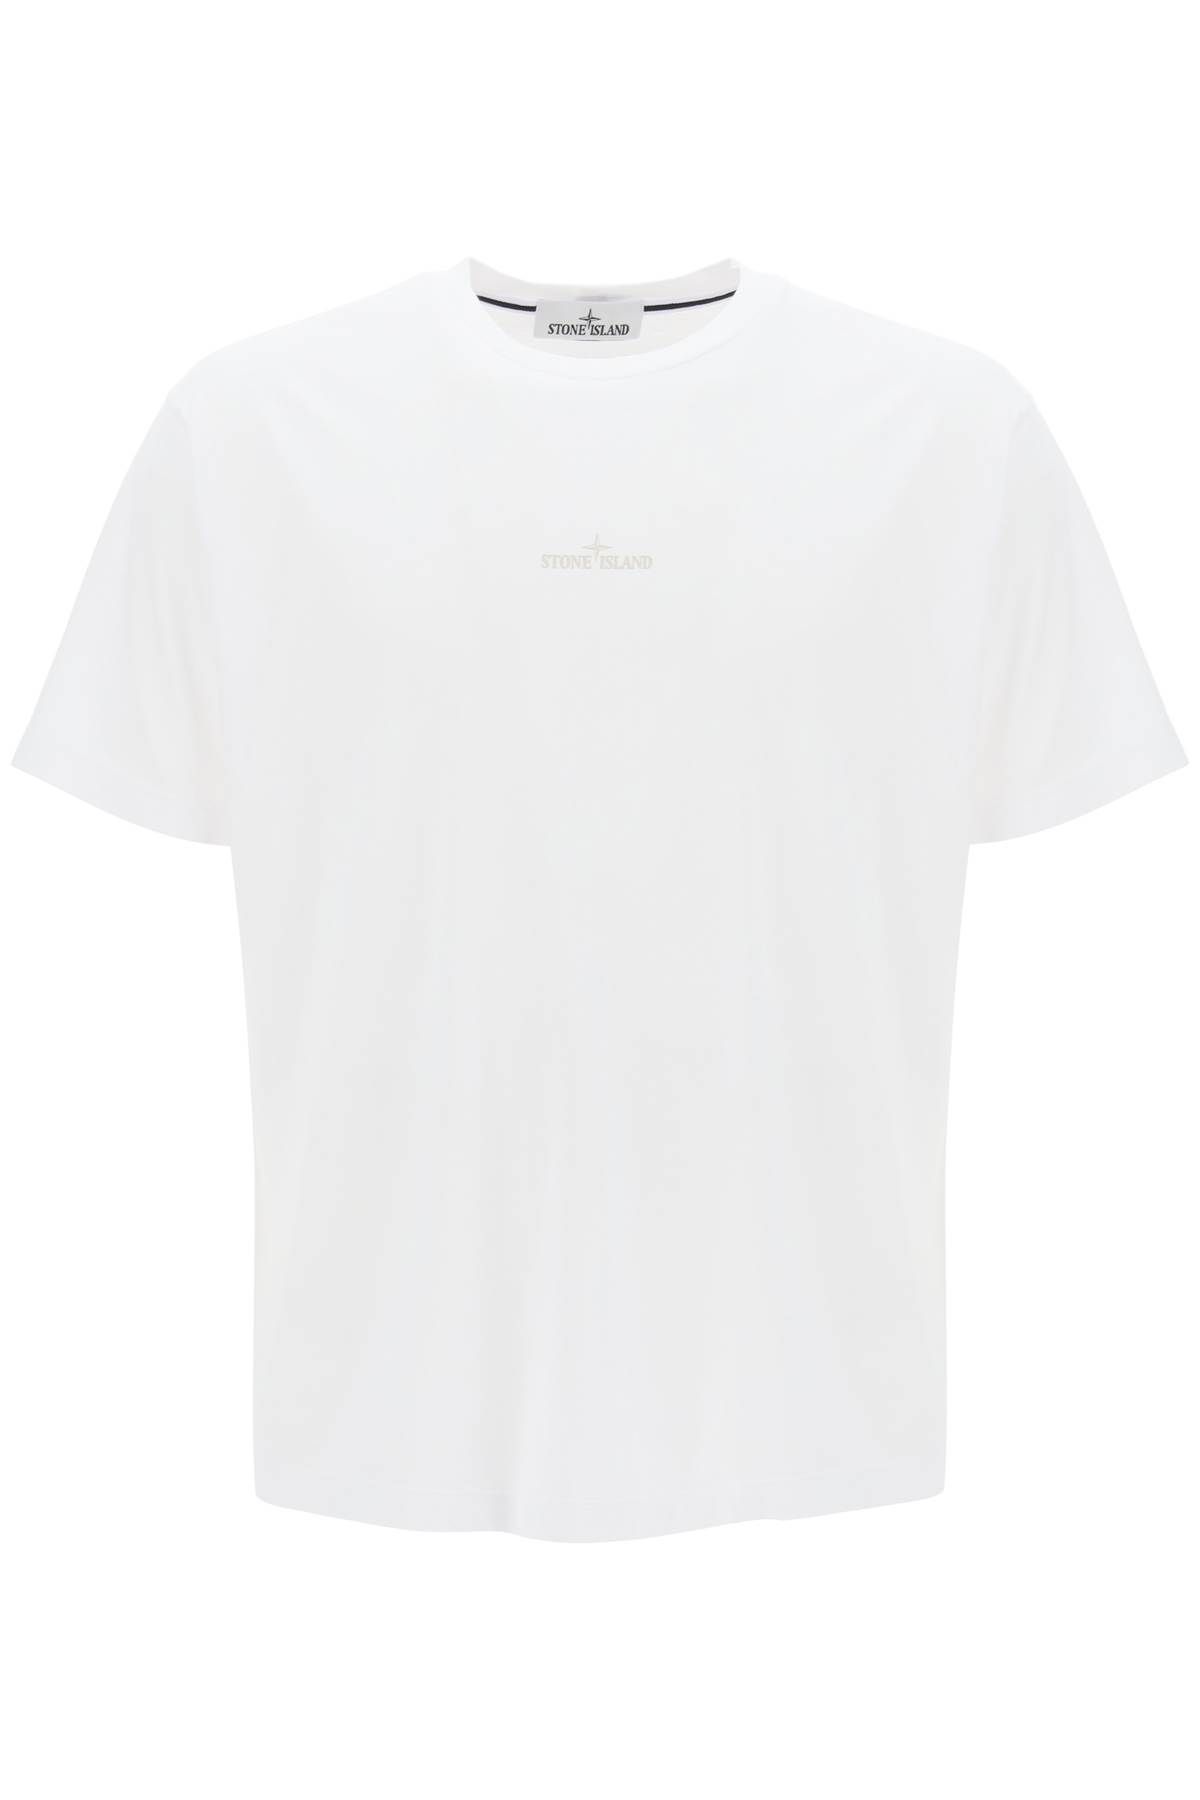 Stone Island T-shirt With Lived-in Effect Print In White